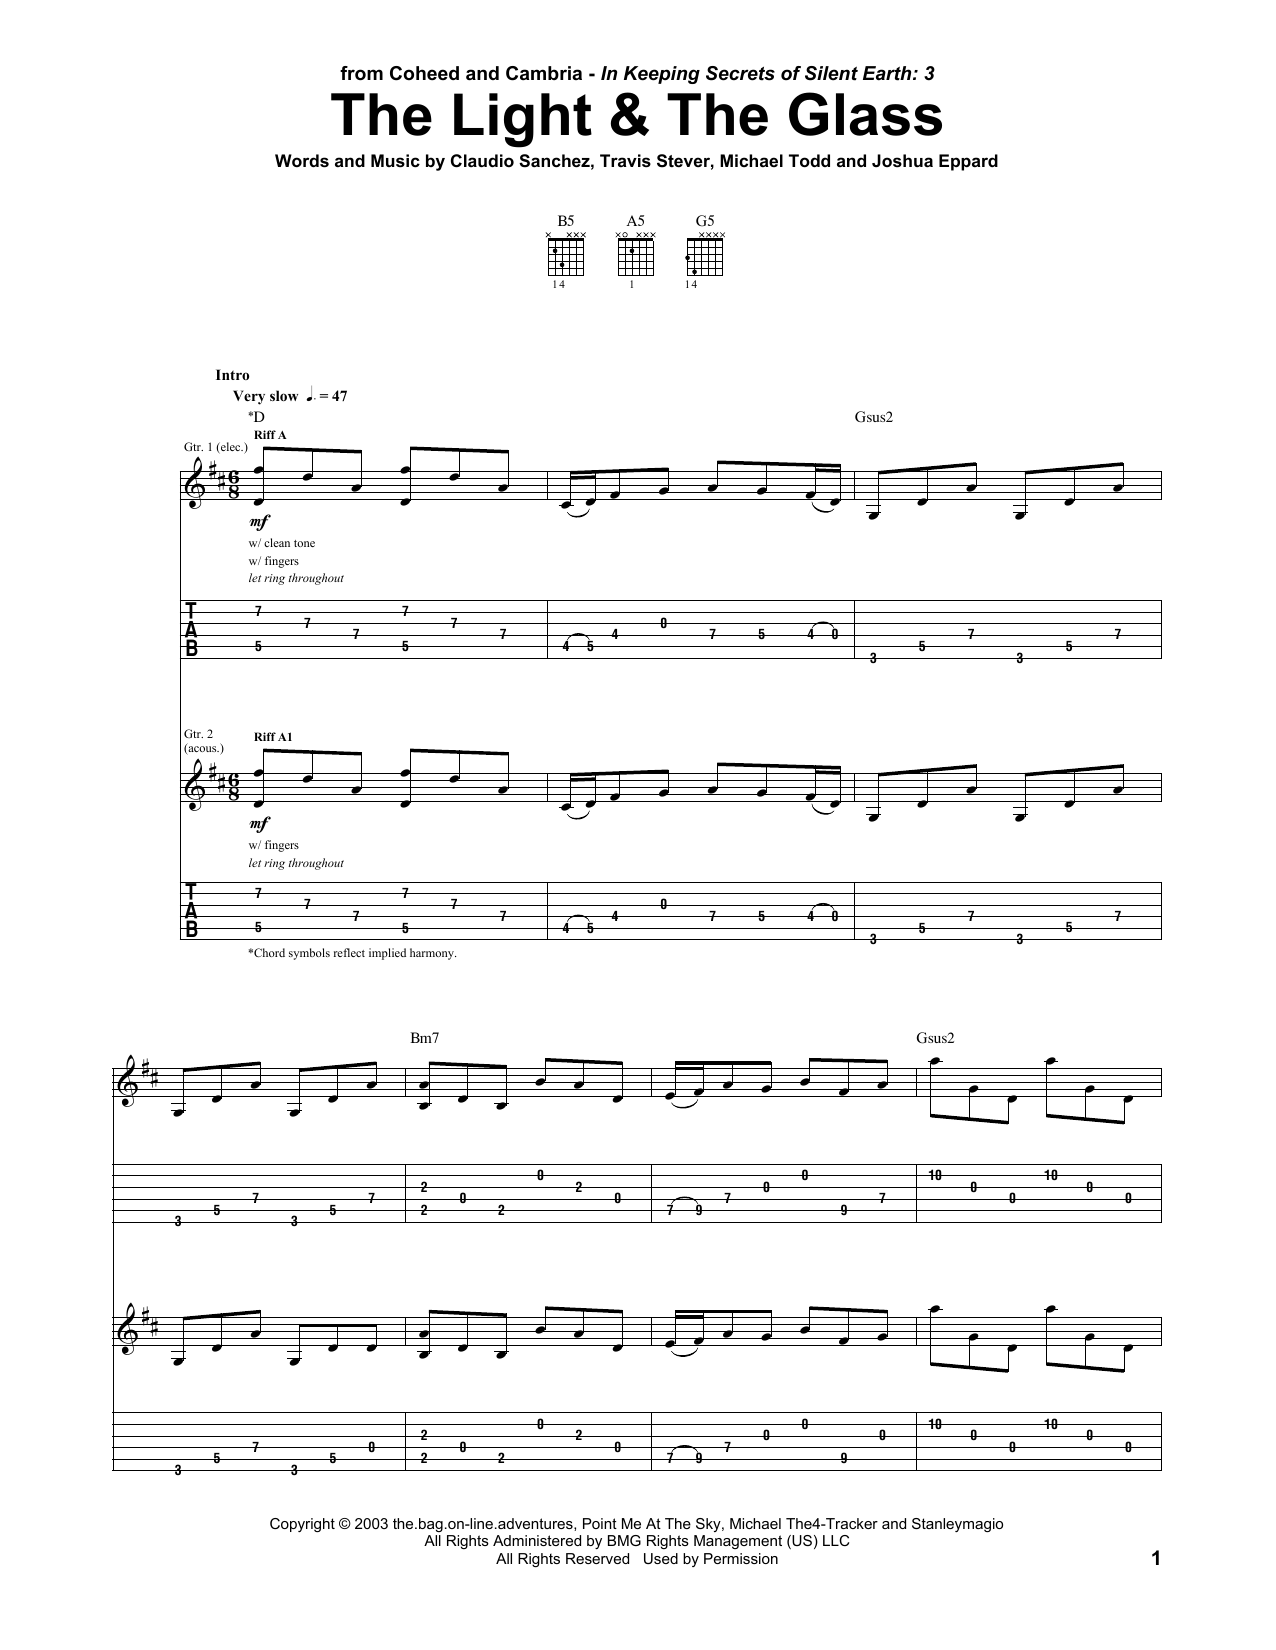 Download Coheed And Cambria The Light & The Glass Sheet Music